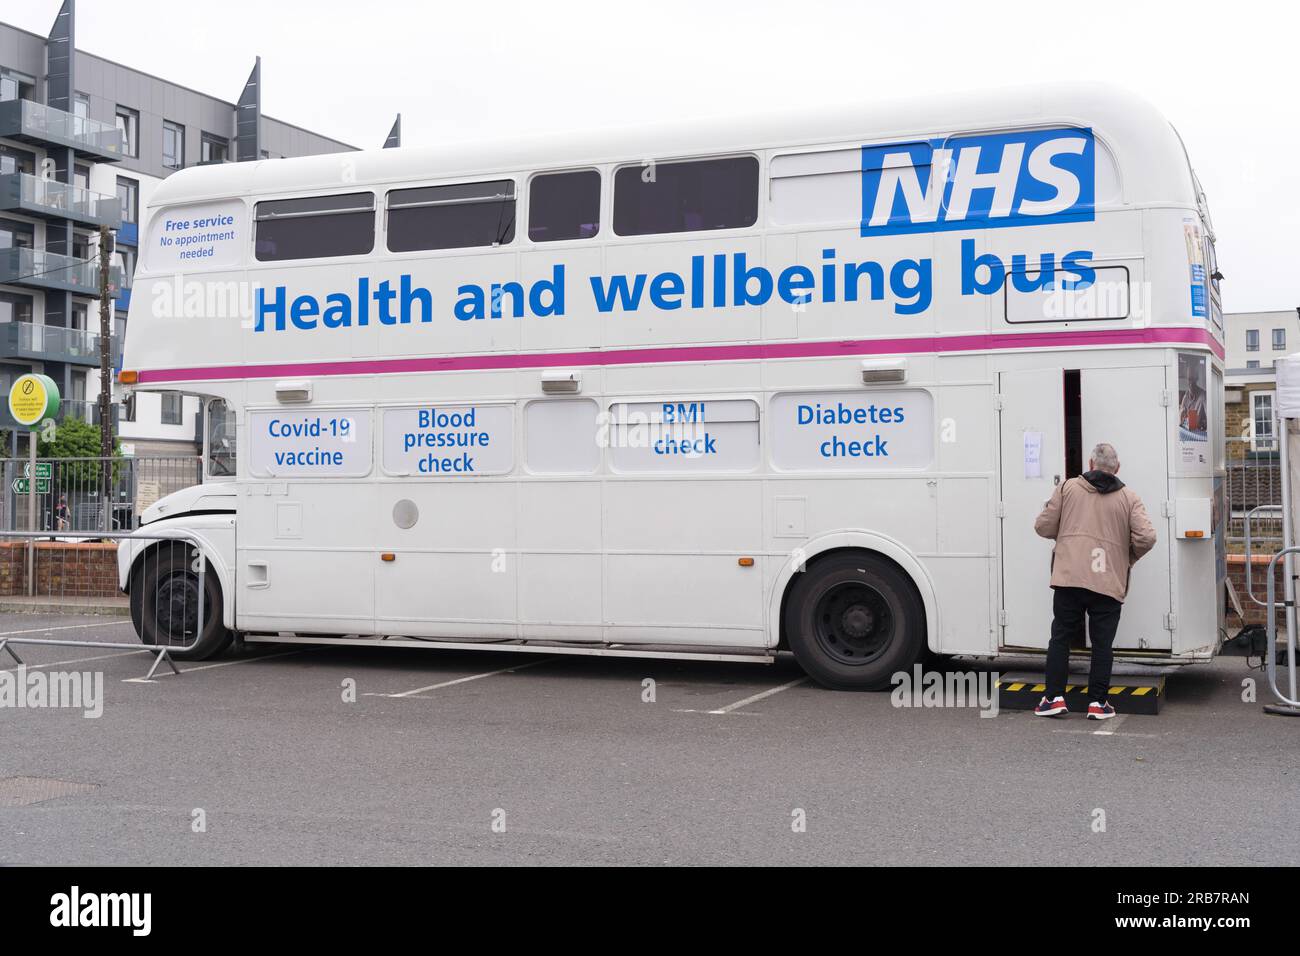 A man walks into NHS bus offering Health and Wellbeing services, Kent England UK Stock Photo